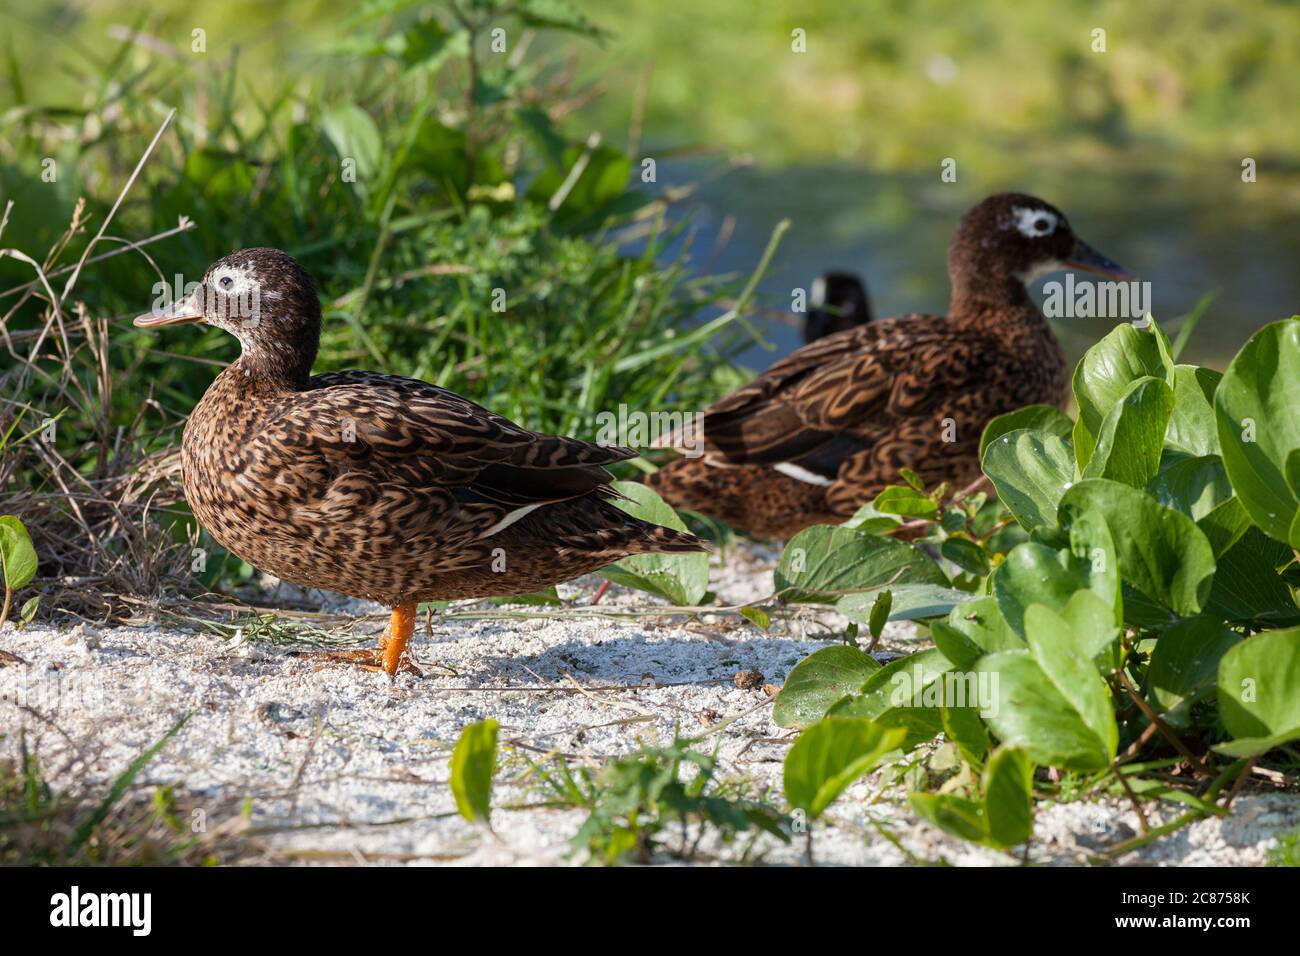 Laysan ducks or Laysan teal, Anas laysanensis, the rarest duck in the world ( Critically Endangered ), Midway Atoll National Wildlife Refuge, USA Stock Photo